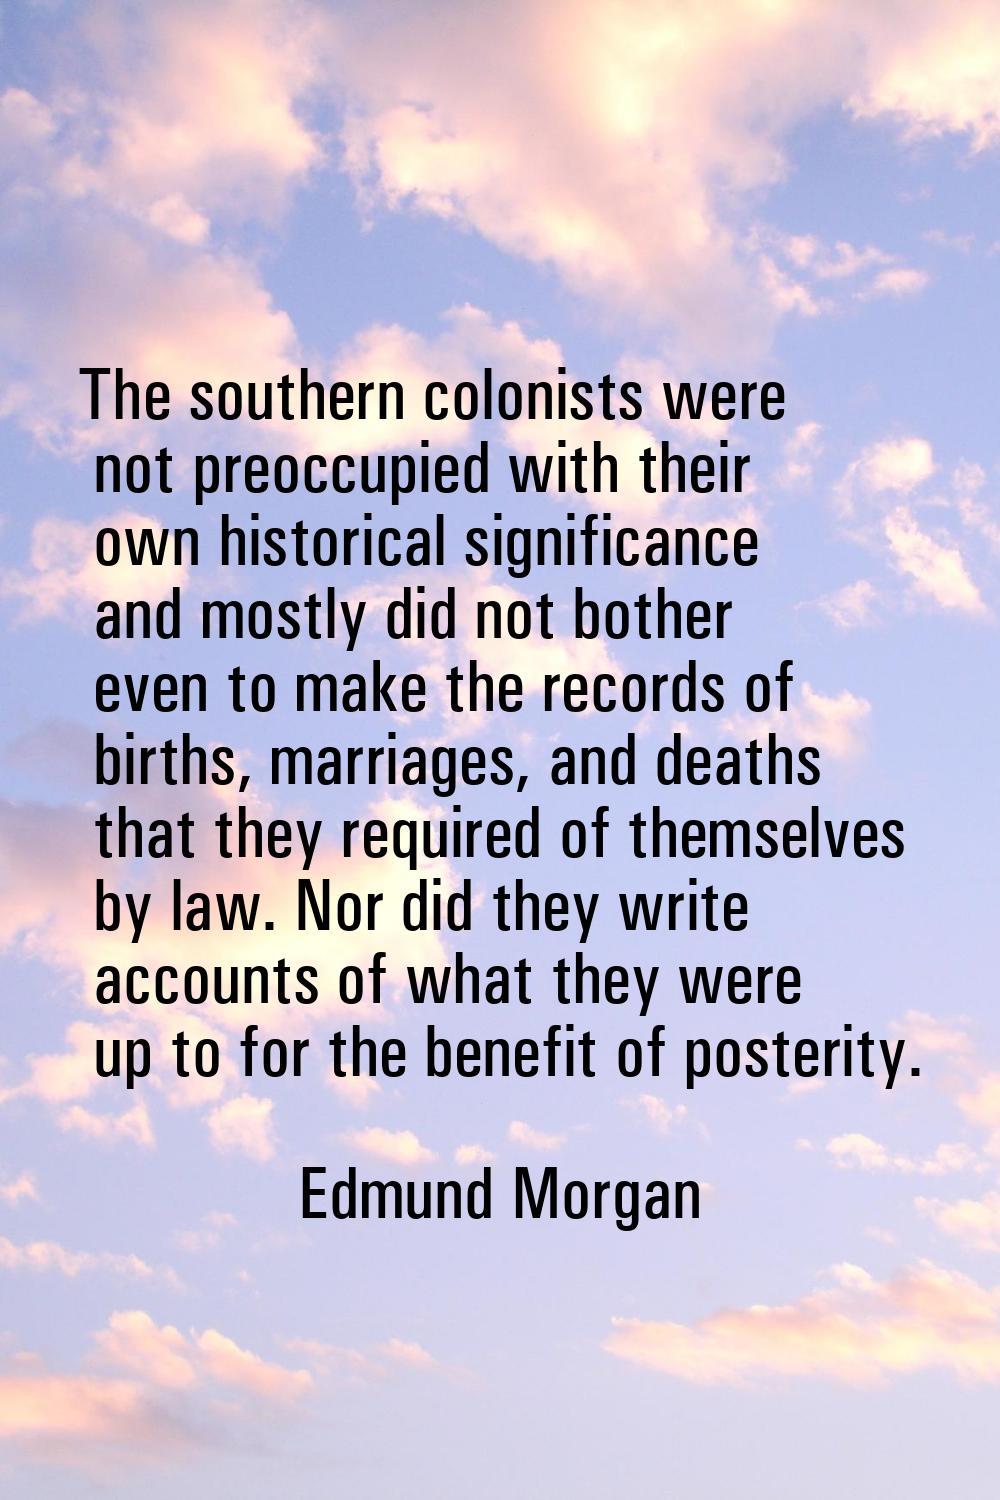 The southern colonists were not preoccupied with their own historical significance and mostly did n